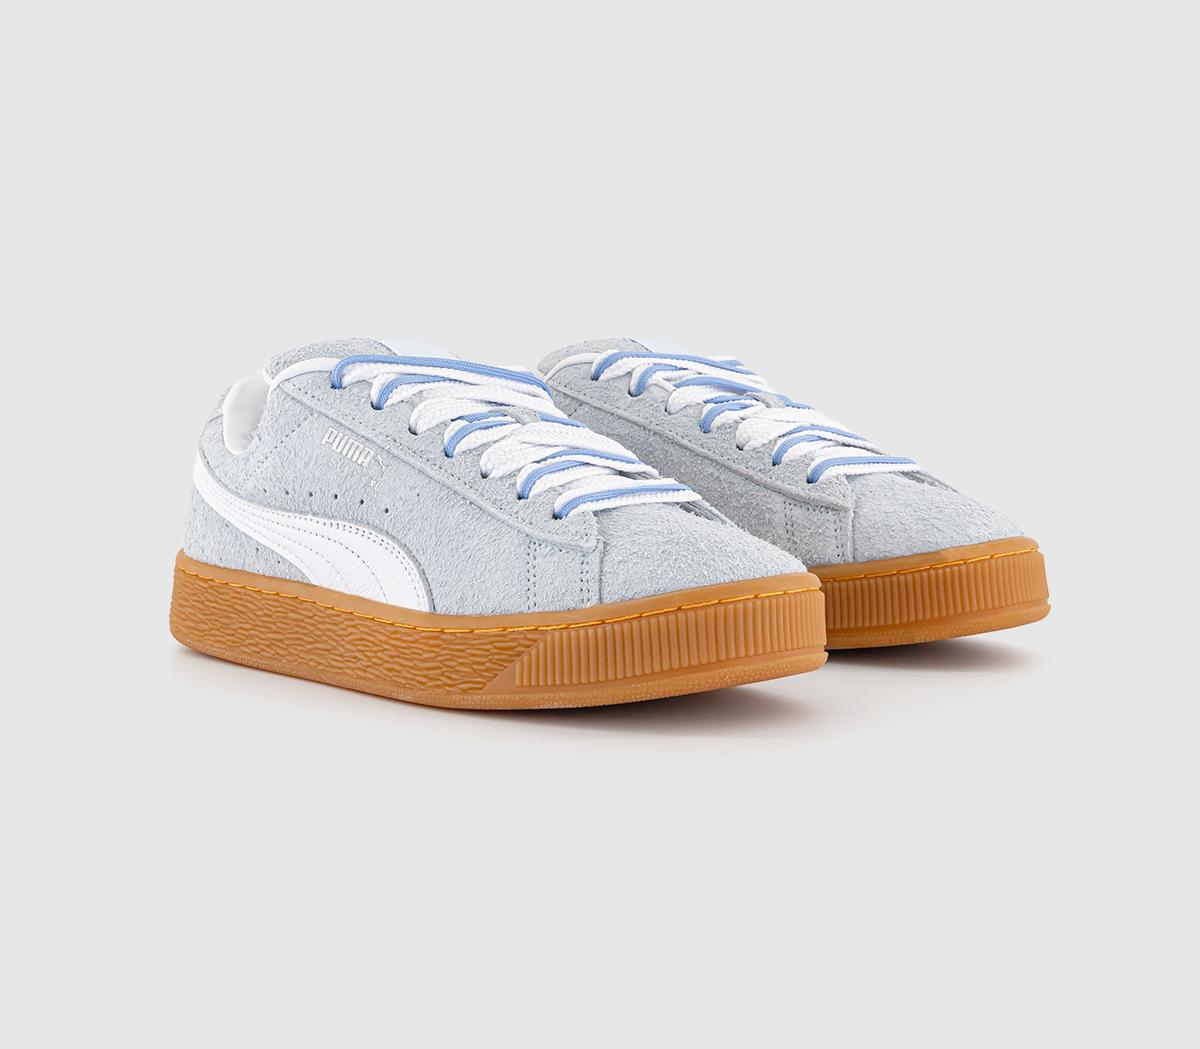 Puma Womens Suede Xl Trainers Icy Blue White Silver, 6